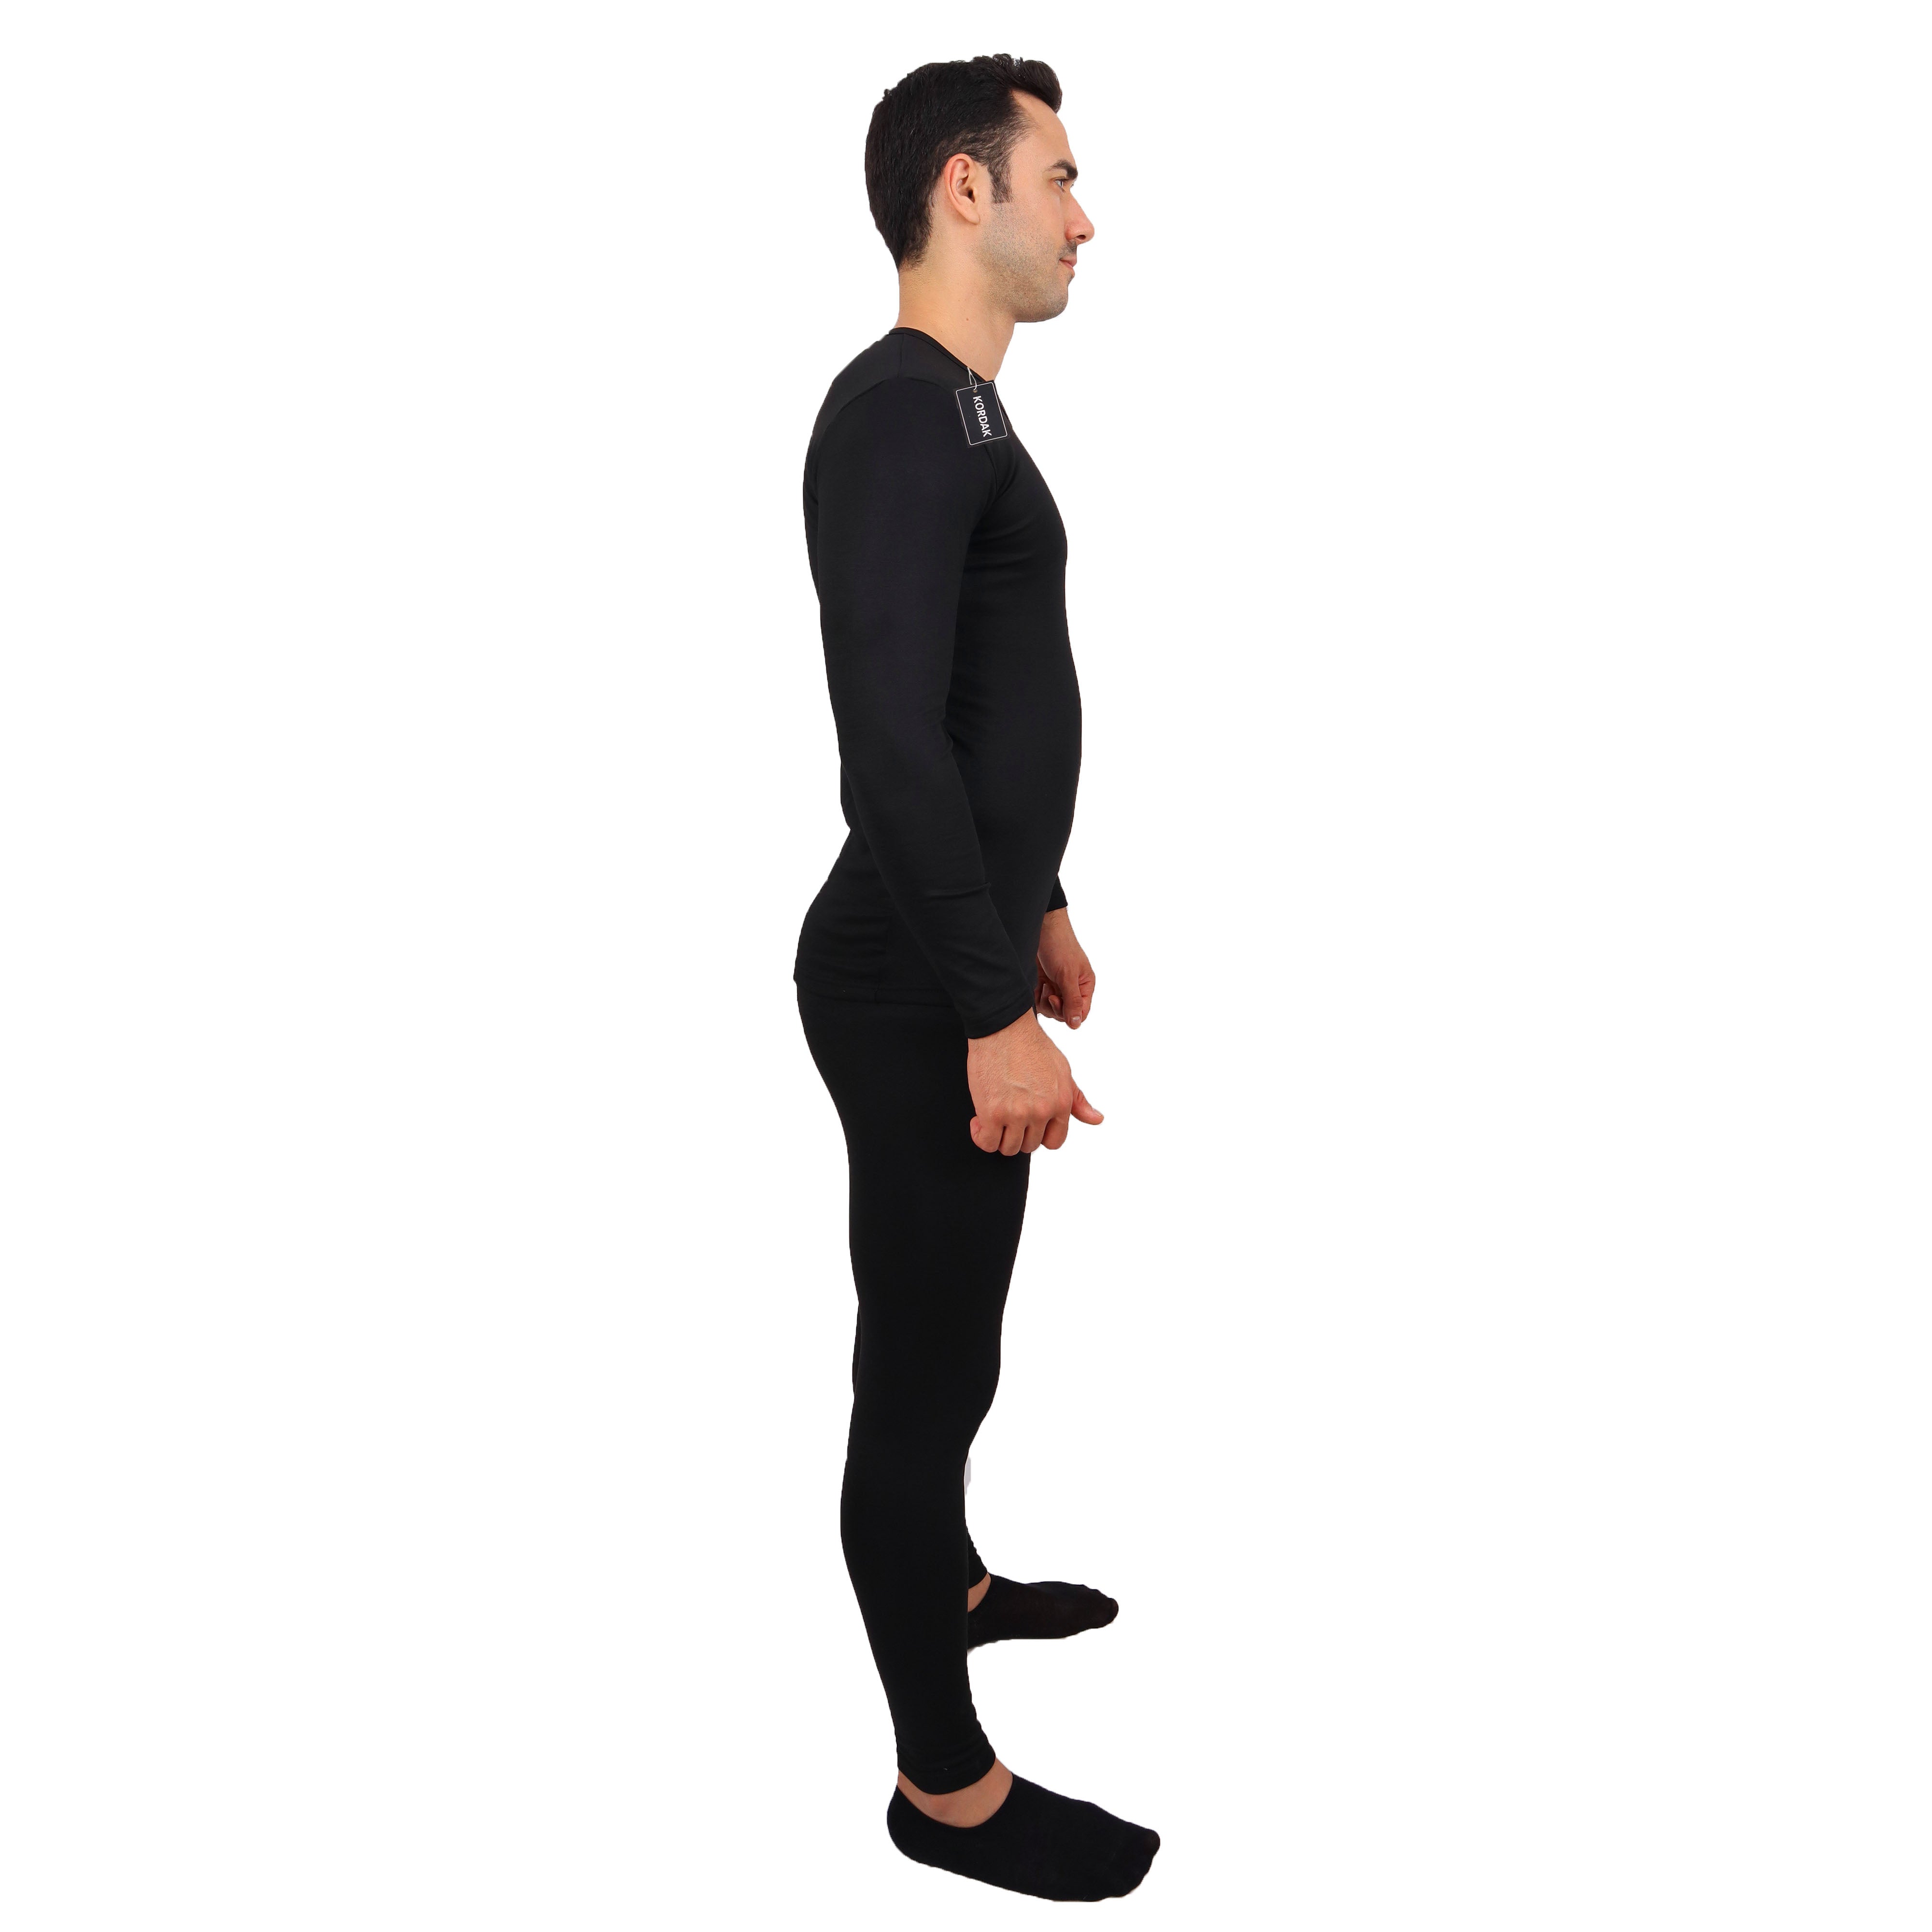 Black Thermal Underwear Set - Keeping Warm Against the Cold Top-Bottom Set